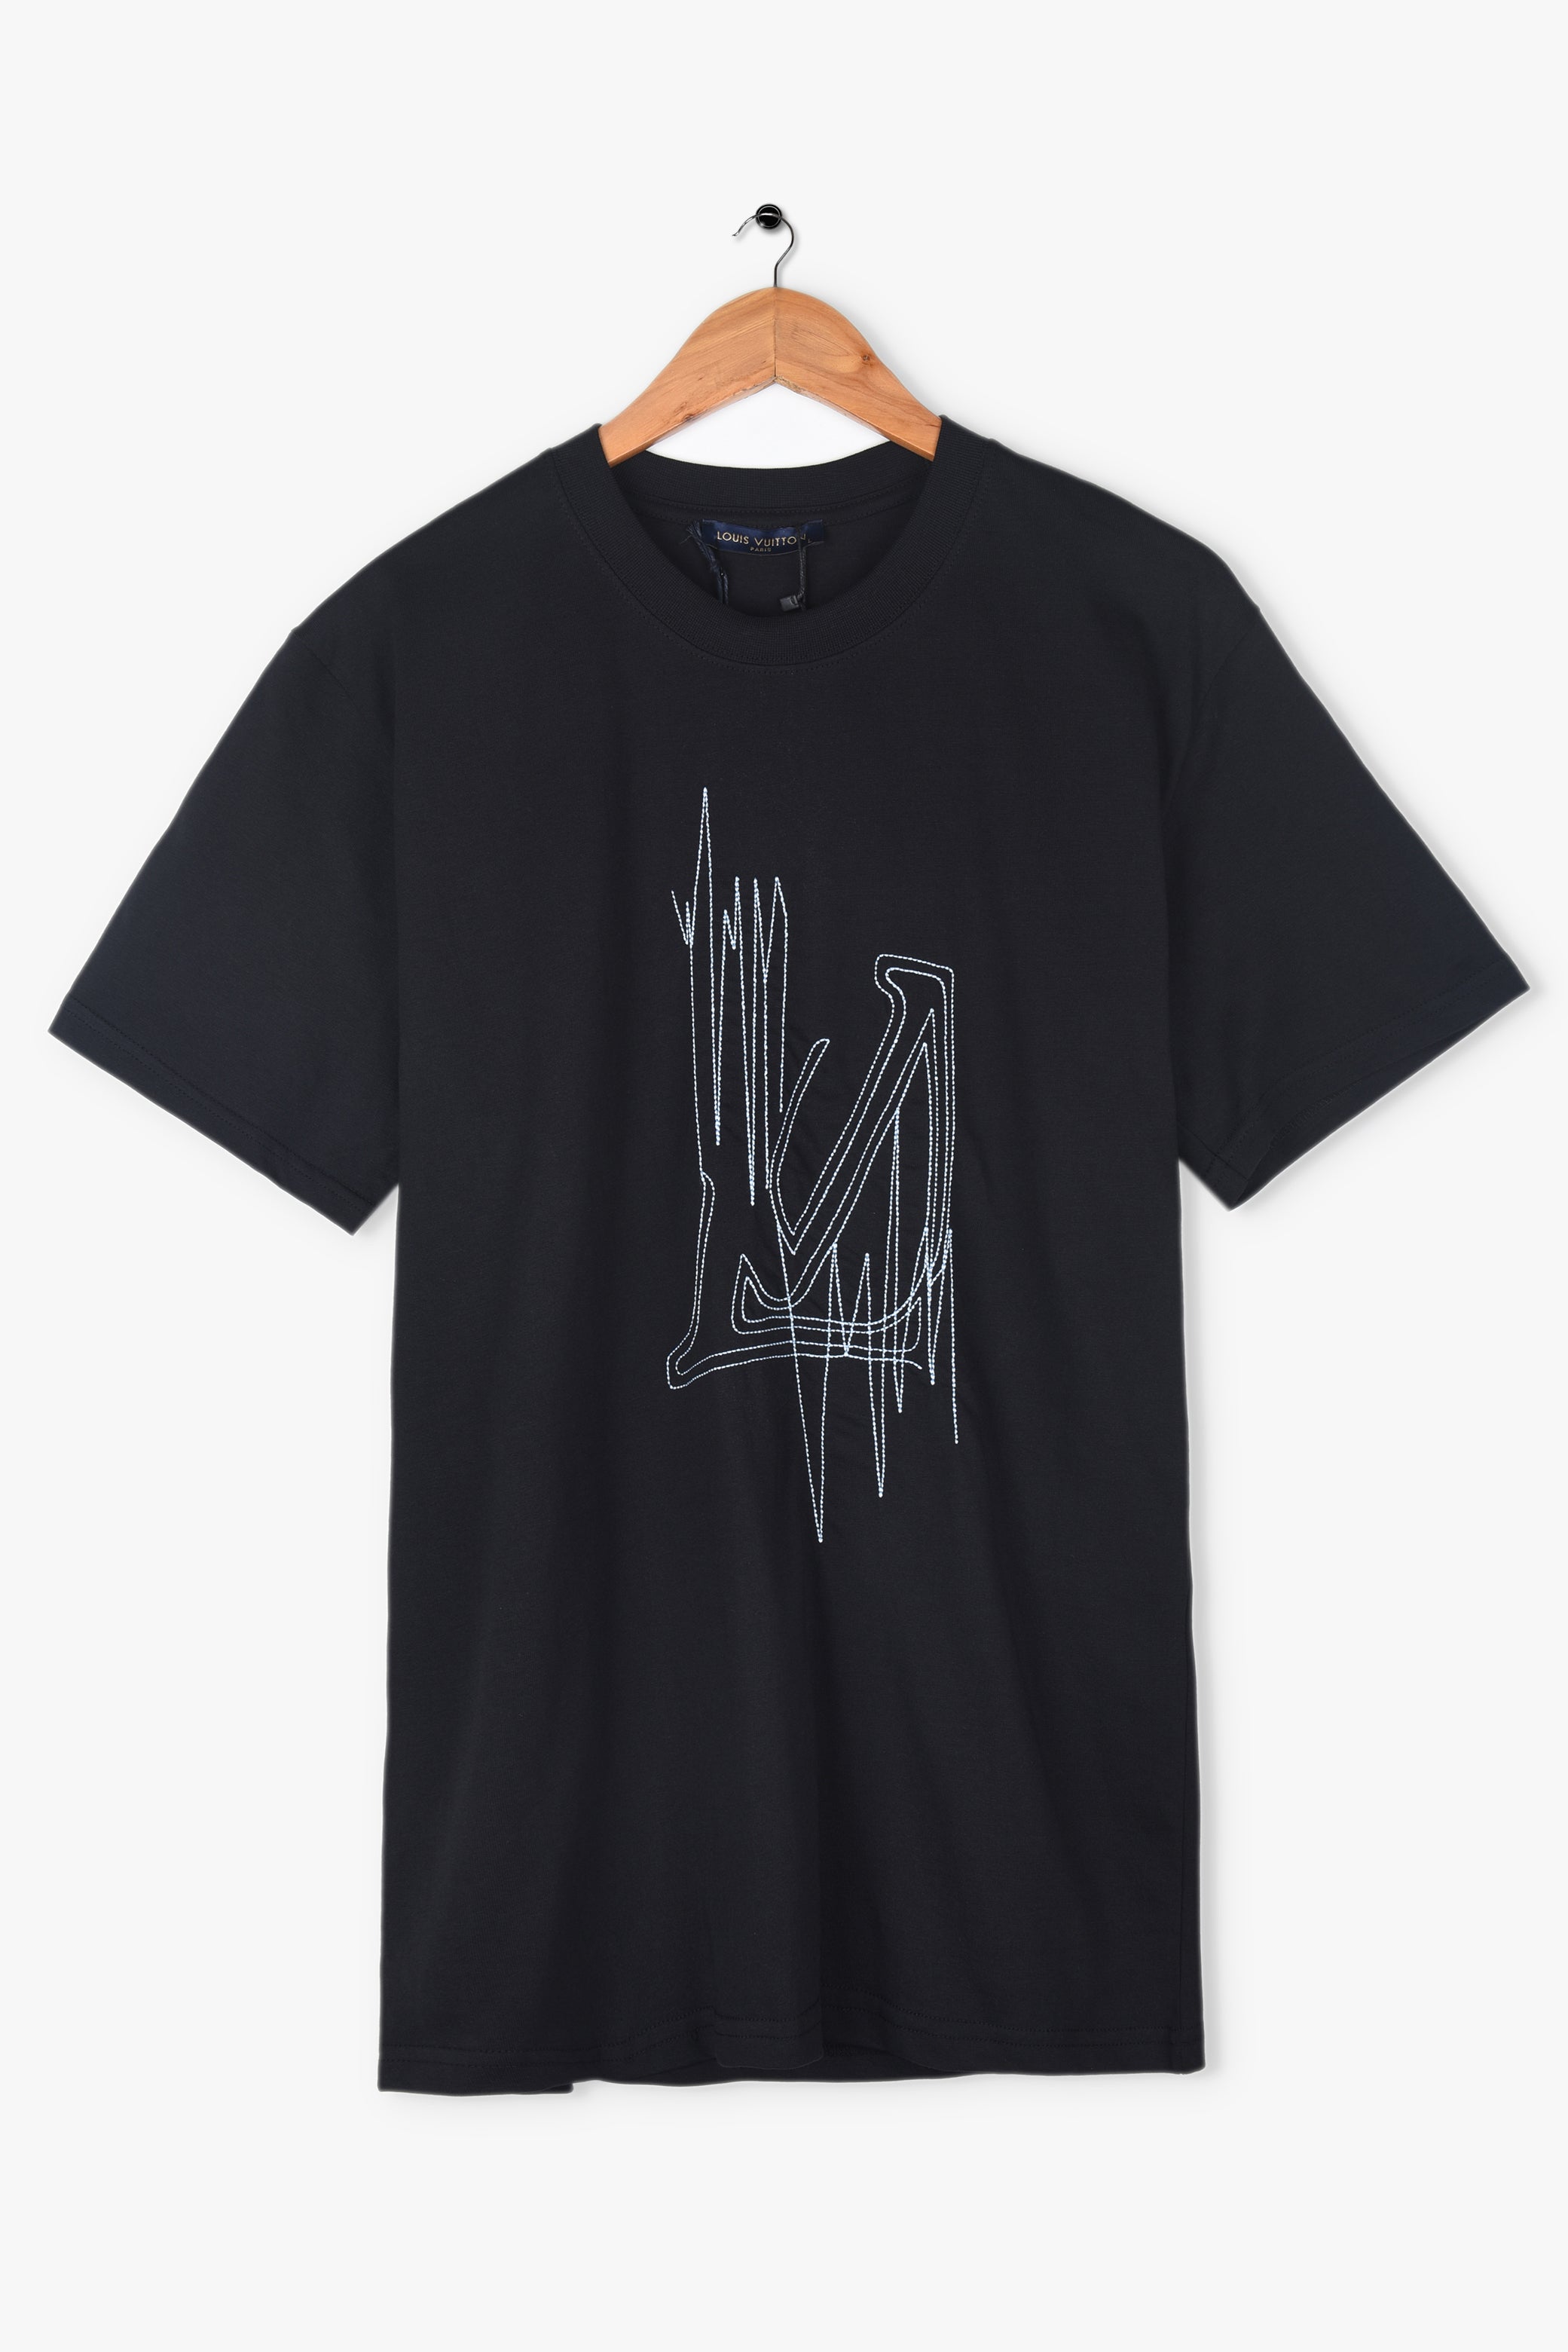 Louis Vuitton Frequency Graphic Tee Shirt black L